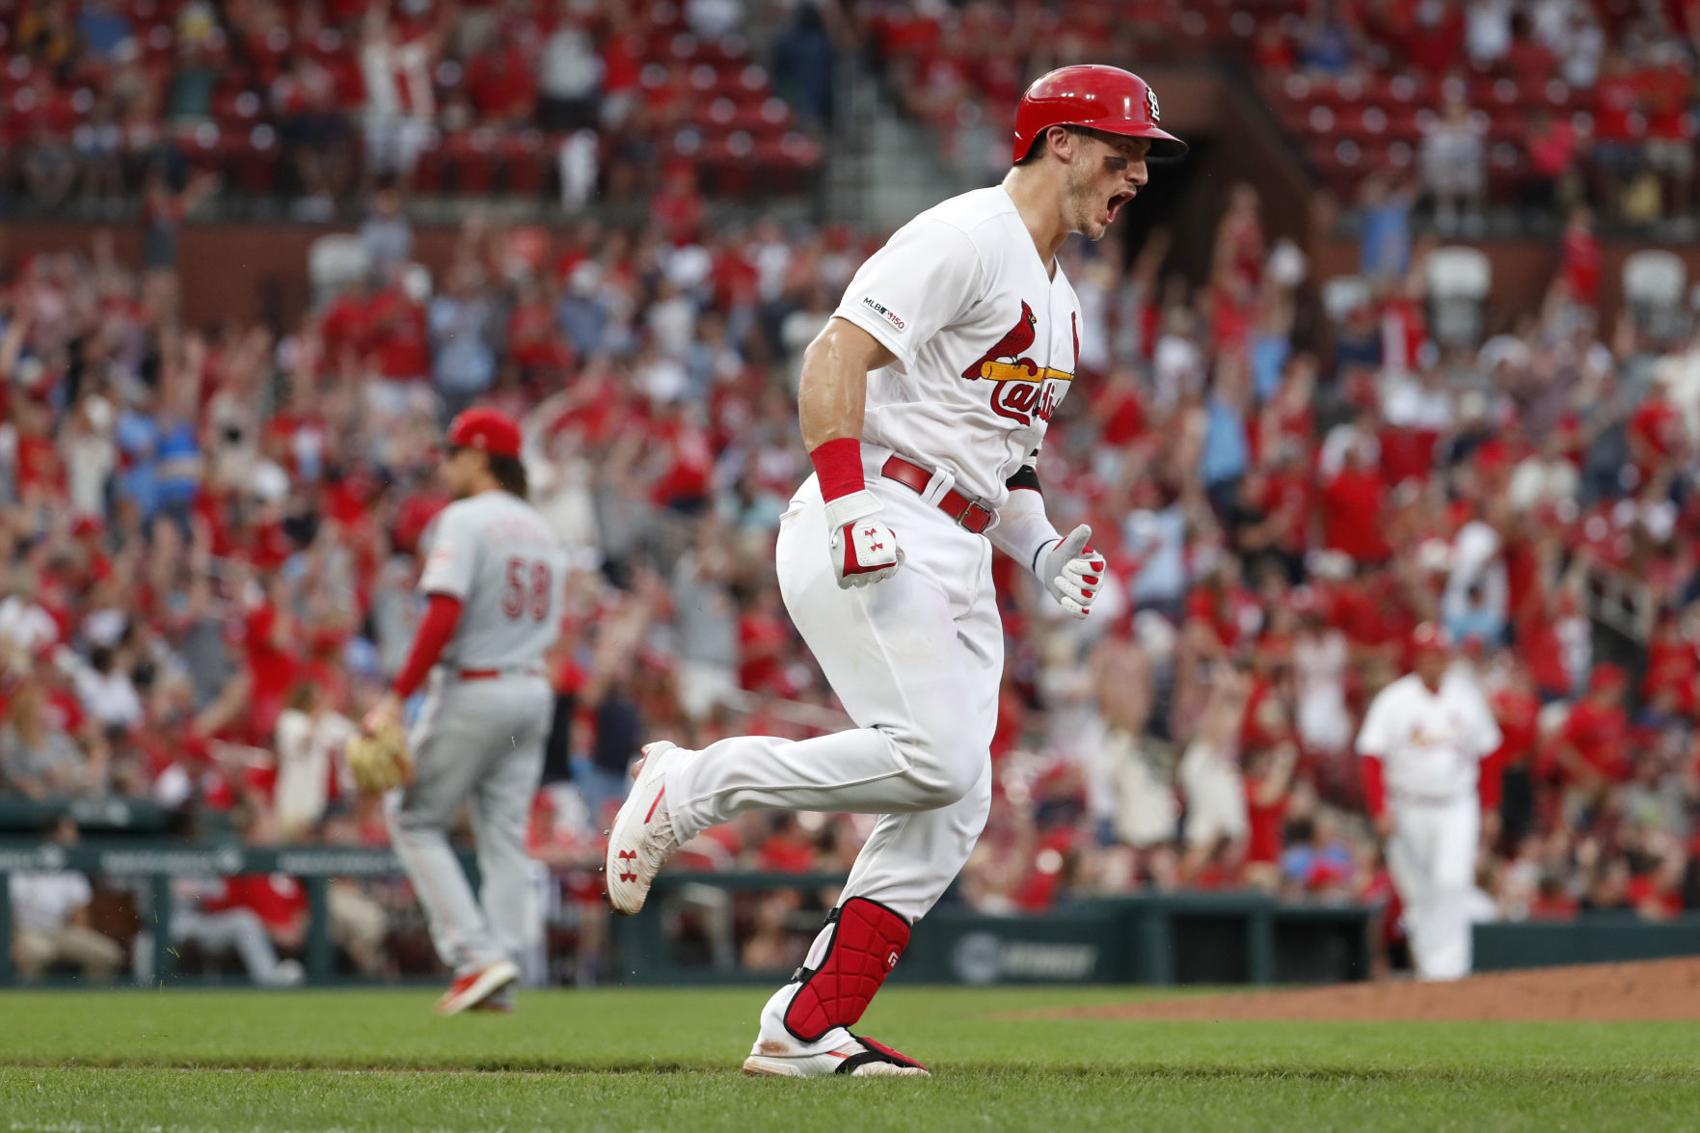 Bottom line on weekend 'whirlwind of baseball': Cards bump lead over Cubs to three games